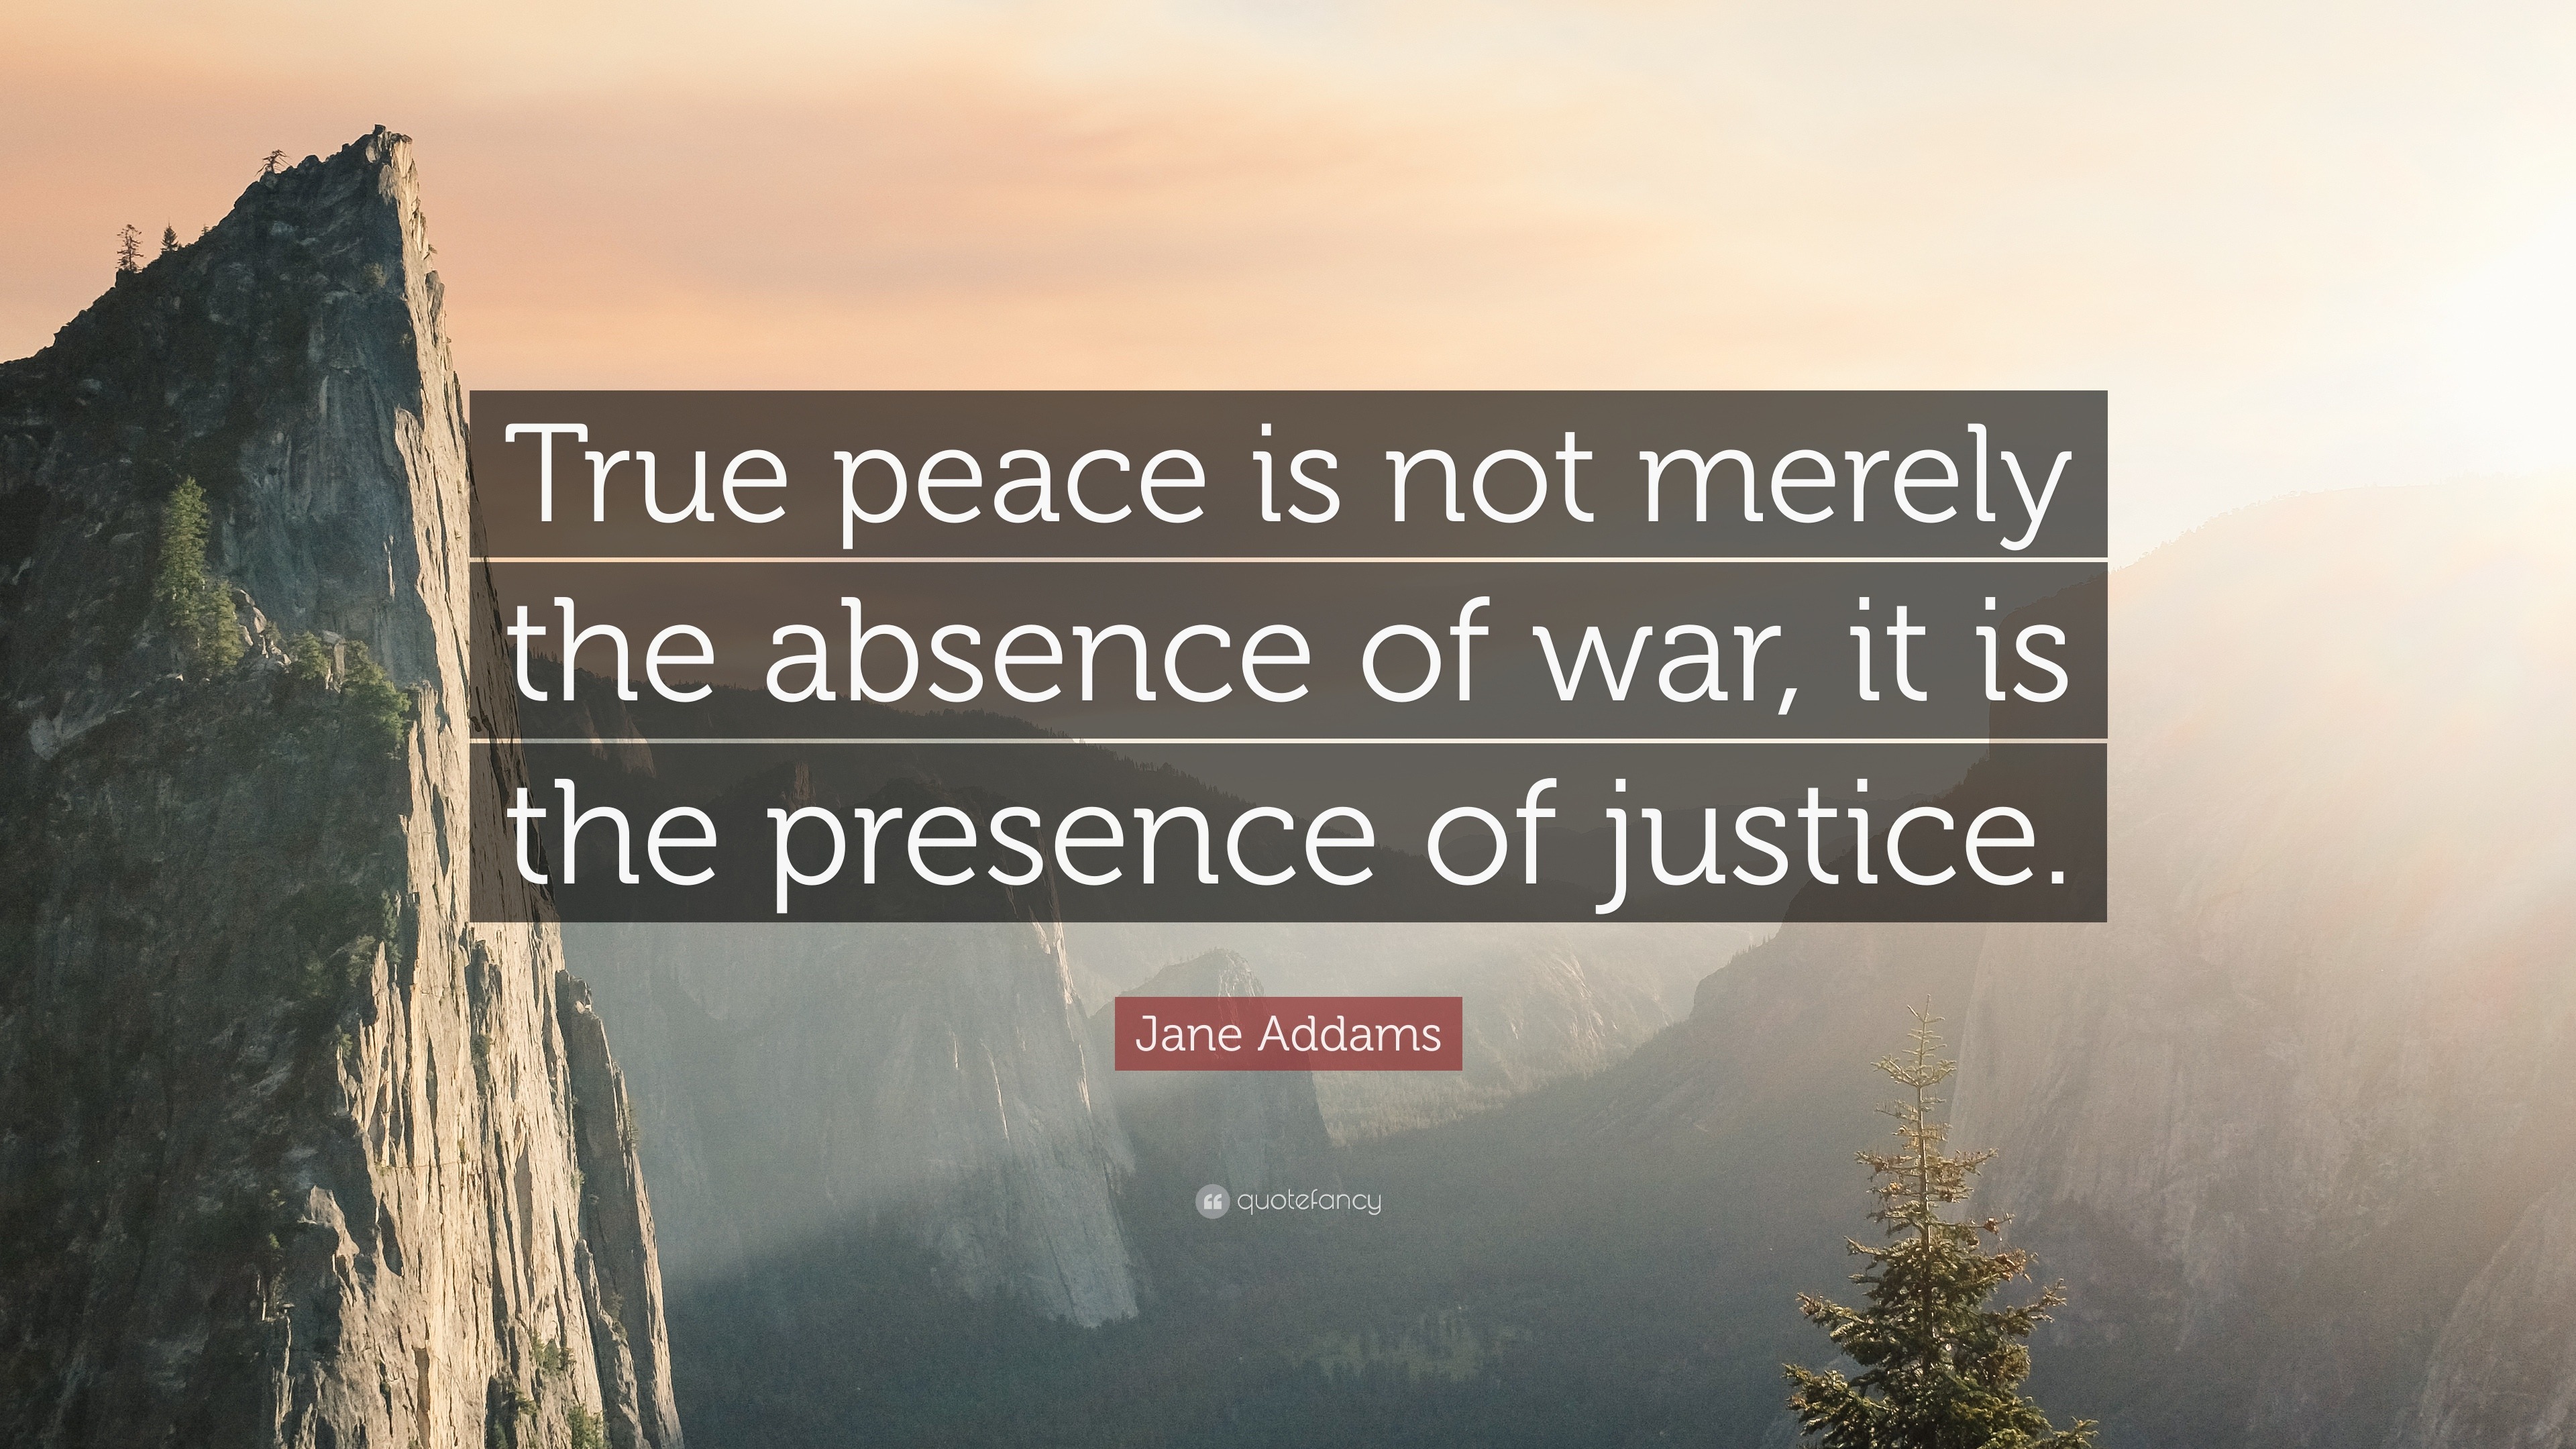 quote peace is not the absence of conflict